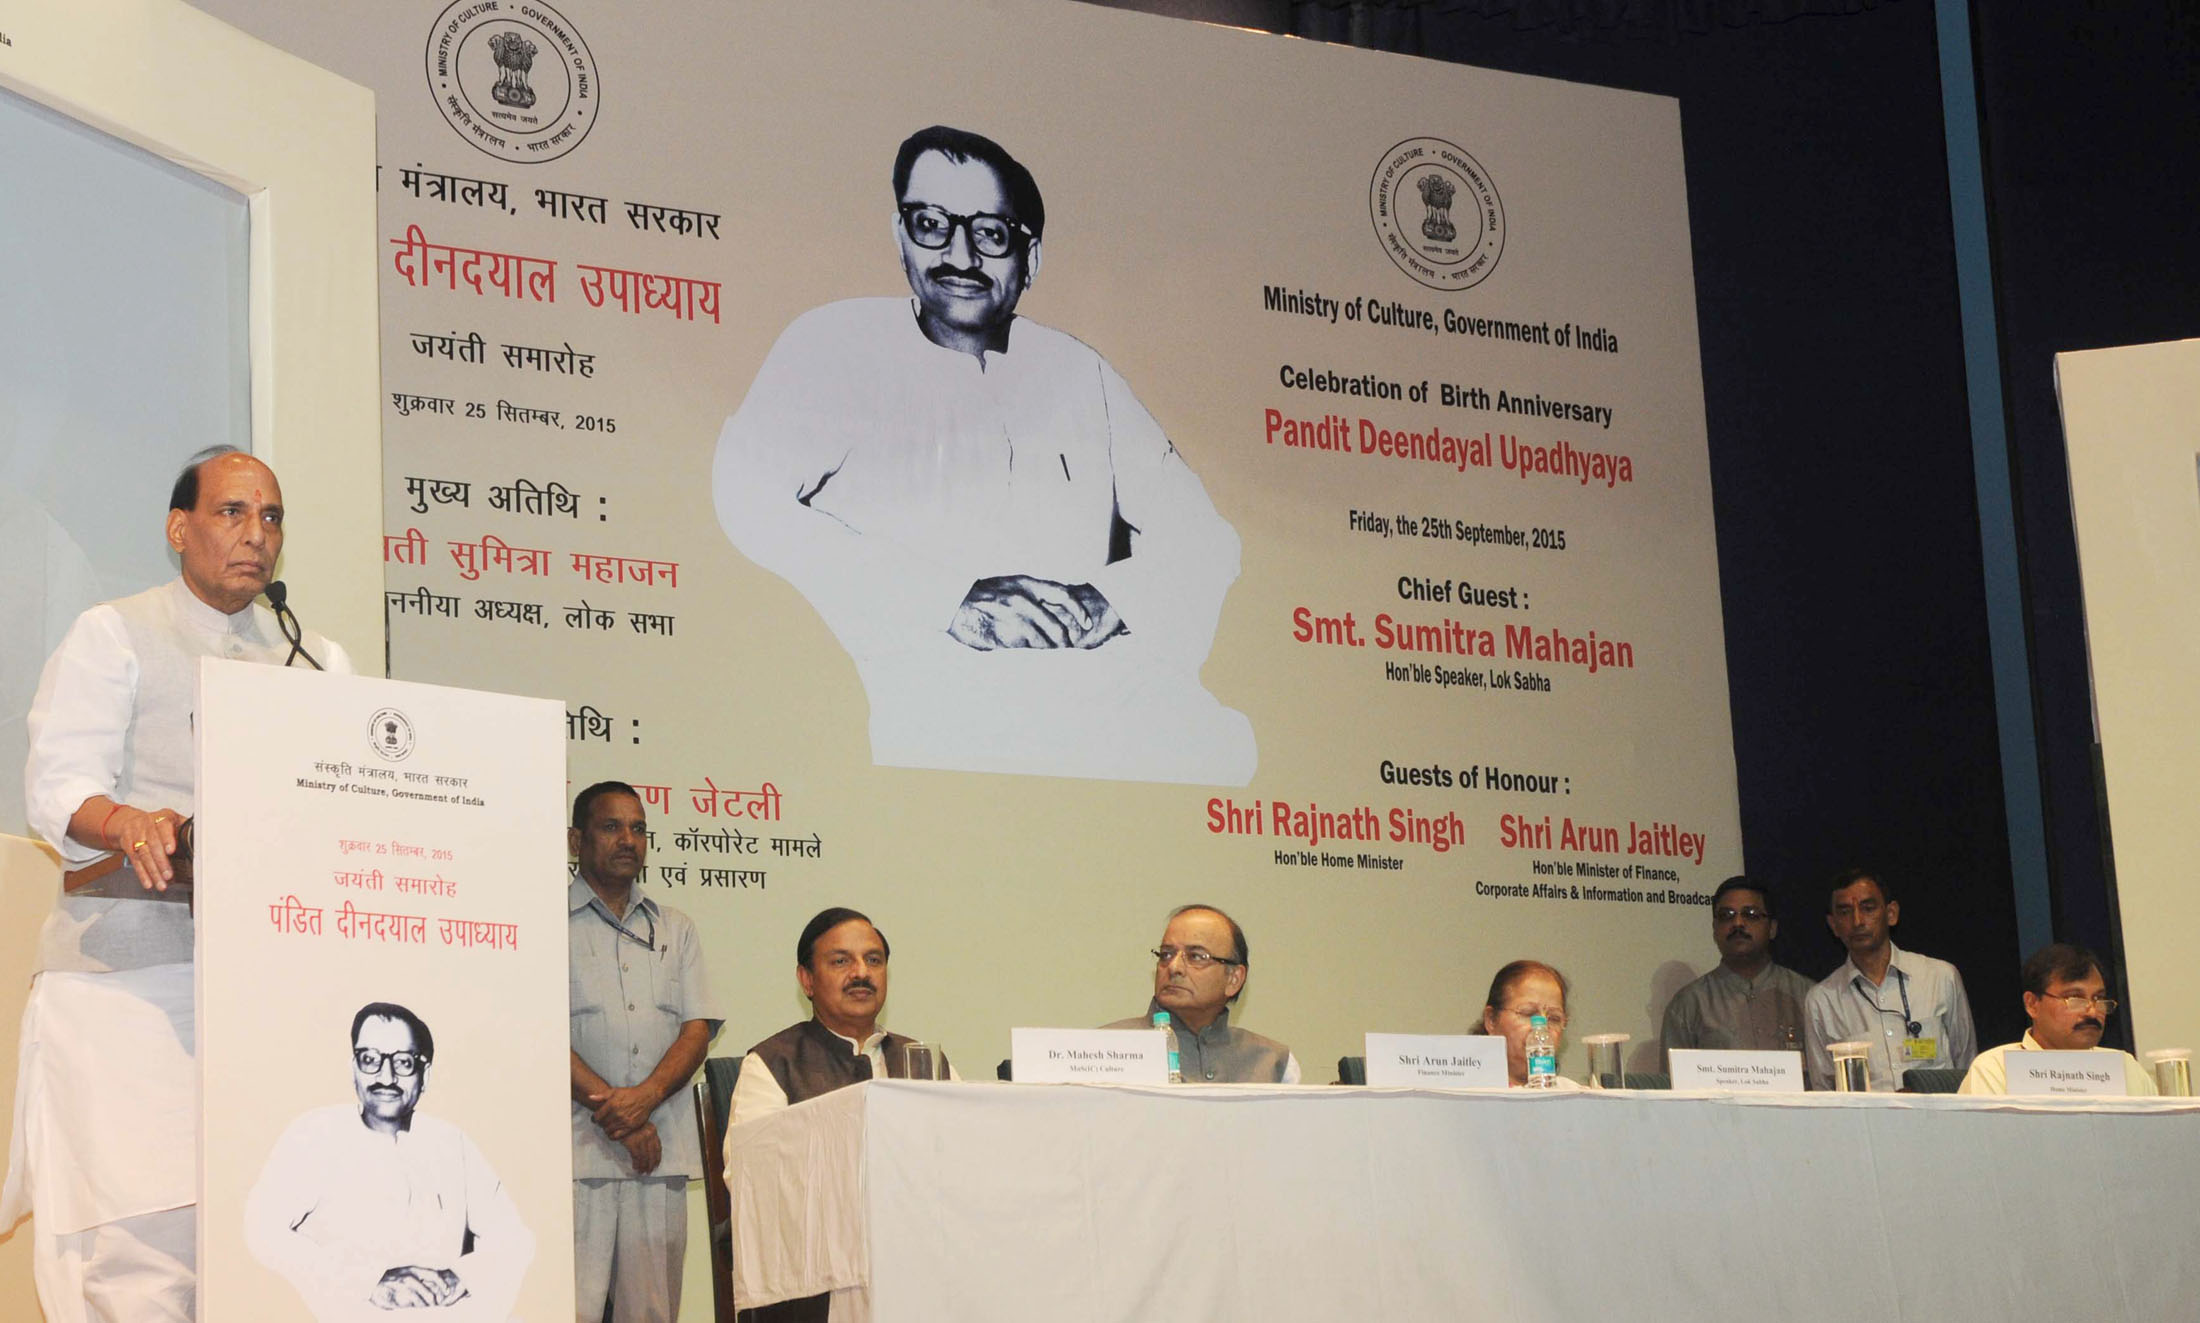 The Union Home Minister, Shri Rajnath Singh addressing at the Birth Anniversary Celebrations of Pandit Deendayal Upadhyaya, in New Delhi on September 25, 2015. 	The Speaker, Lok Sabha, Smt. Sumitra Mahajan, the Union Minister for Finance, Corporate Affairs and Information & Broadcasting, Shri Arun Jaitley, the Minister of State for Culture (Independent Charge), Tourism (Independent Charge) and Civil Aviation, Dr. Mahesh Sharma and the Secretary, Ministry of Culture, Shri Narendra Kumar Sinha are also seen.